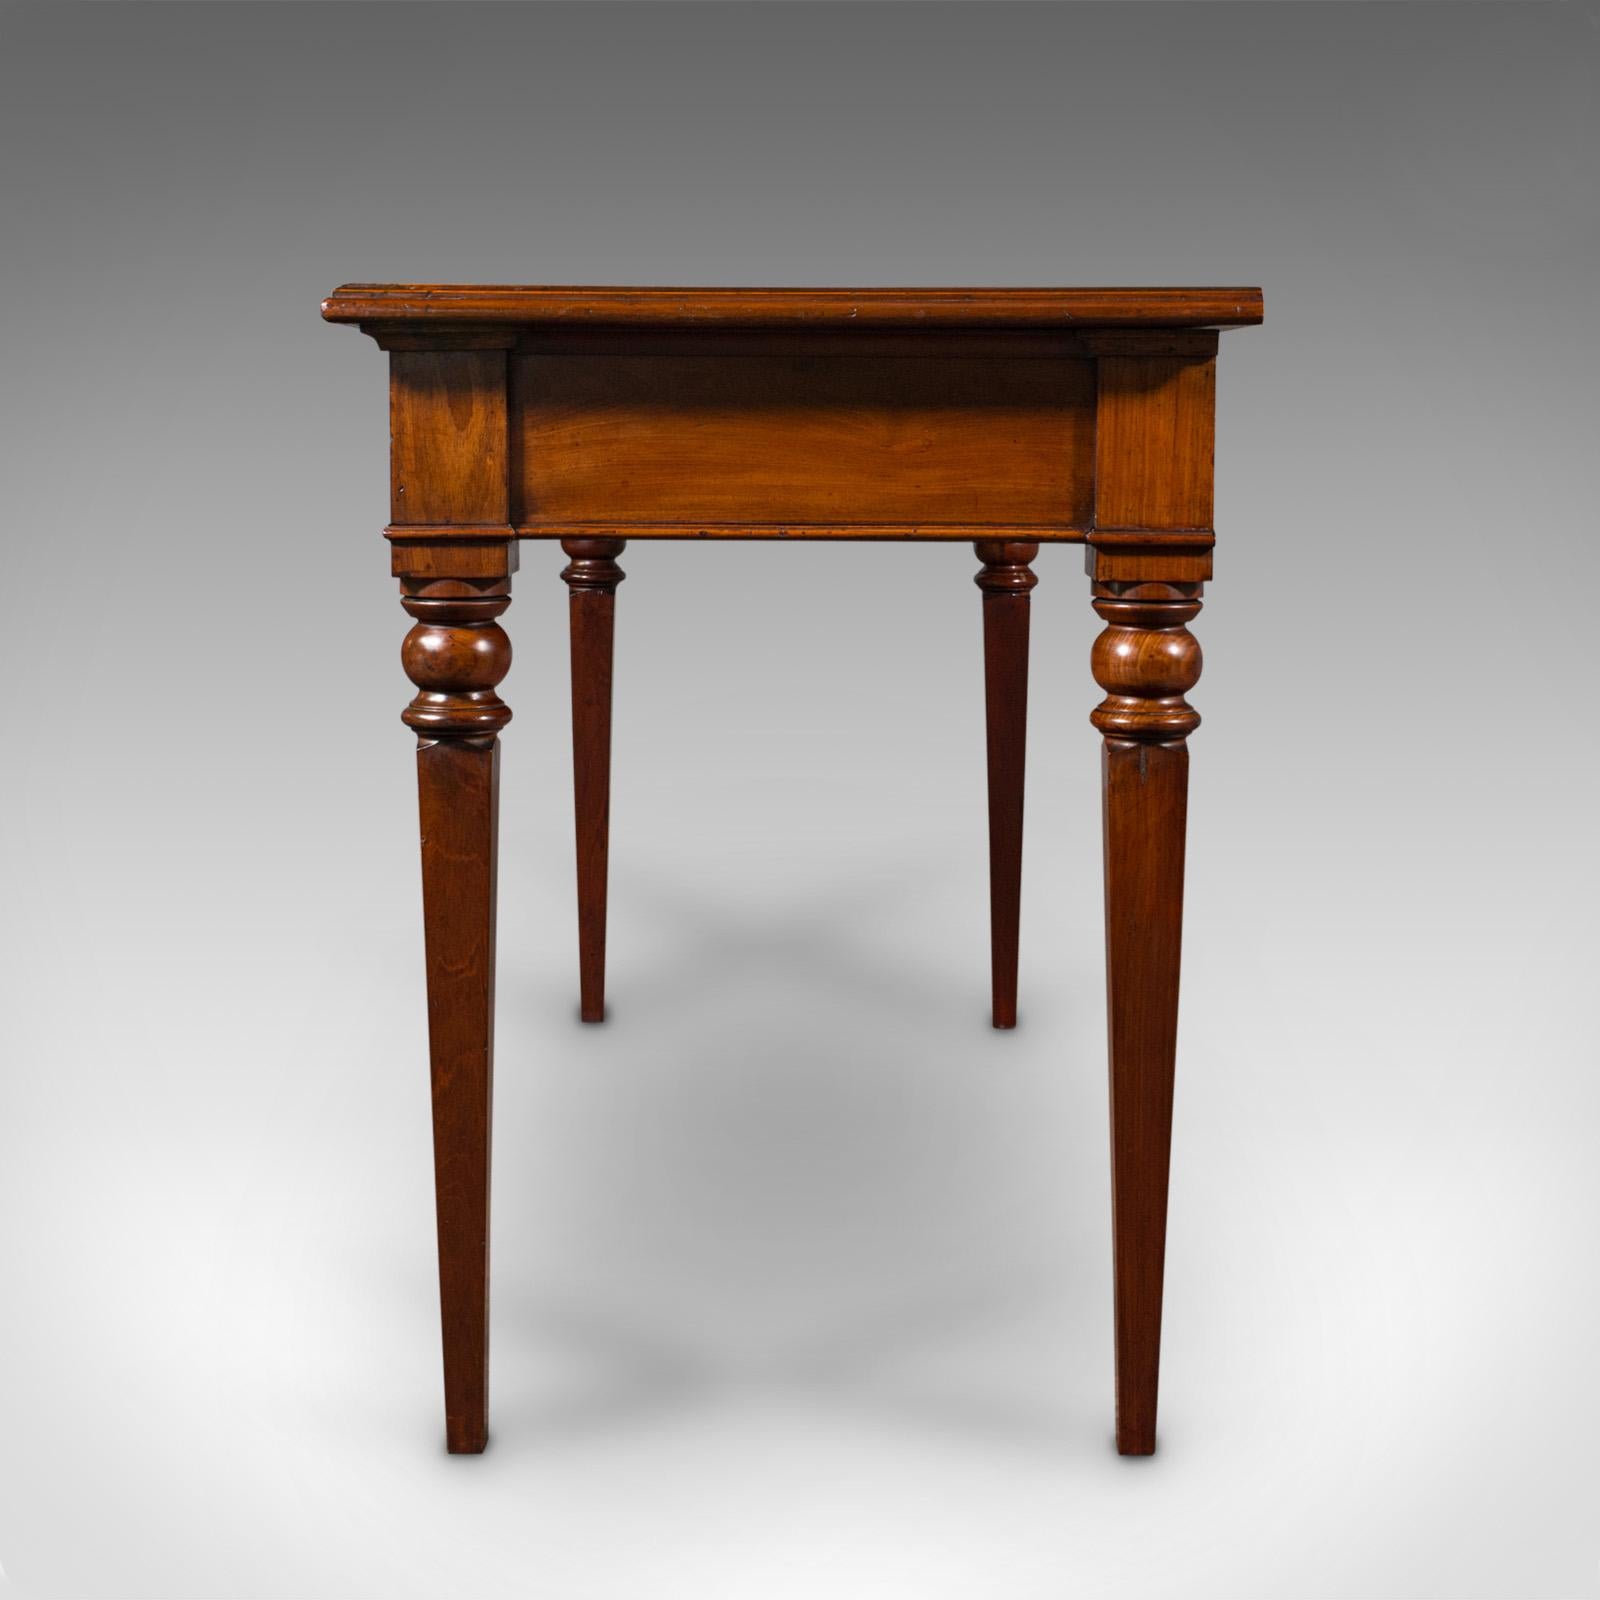 Antique Writer's Desk, English, Inlay, Side, Serving Table, Georgian, C.1800 In Good Condition For Sale In Hele, Devon, GB